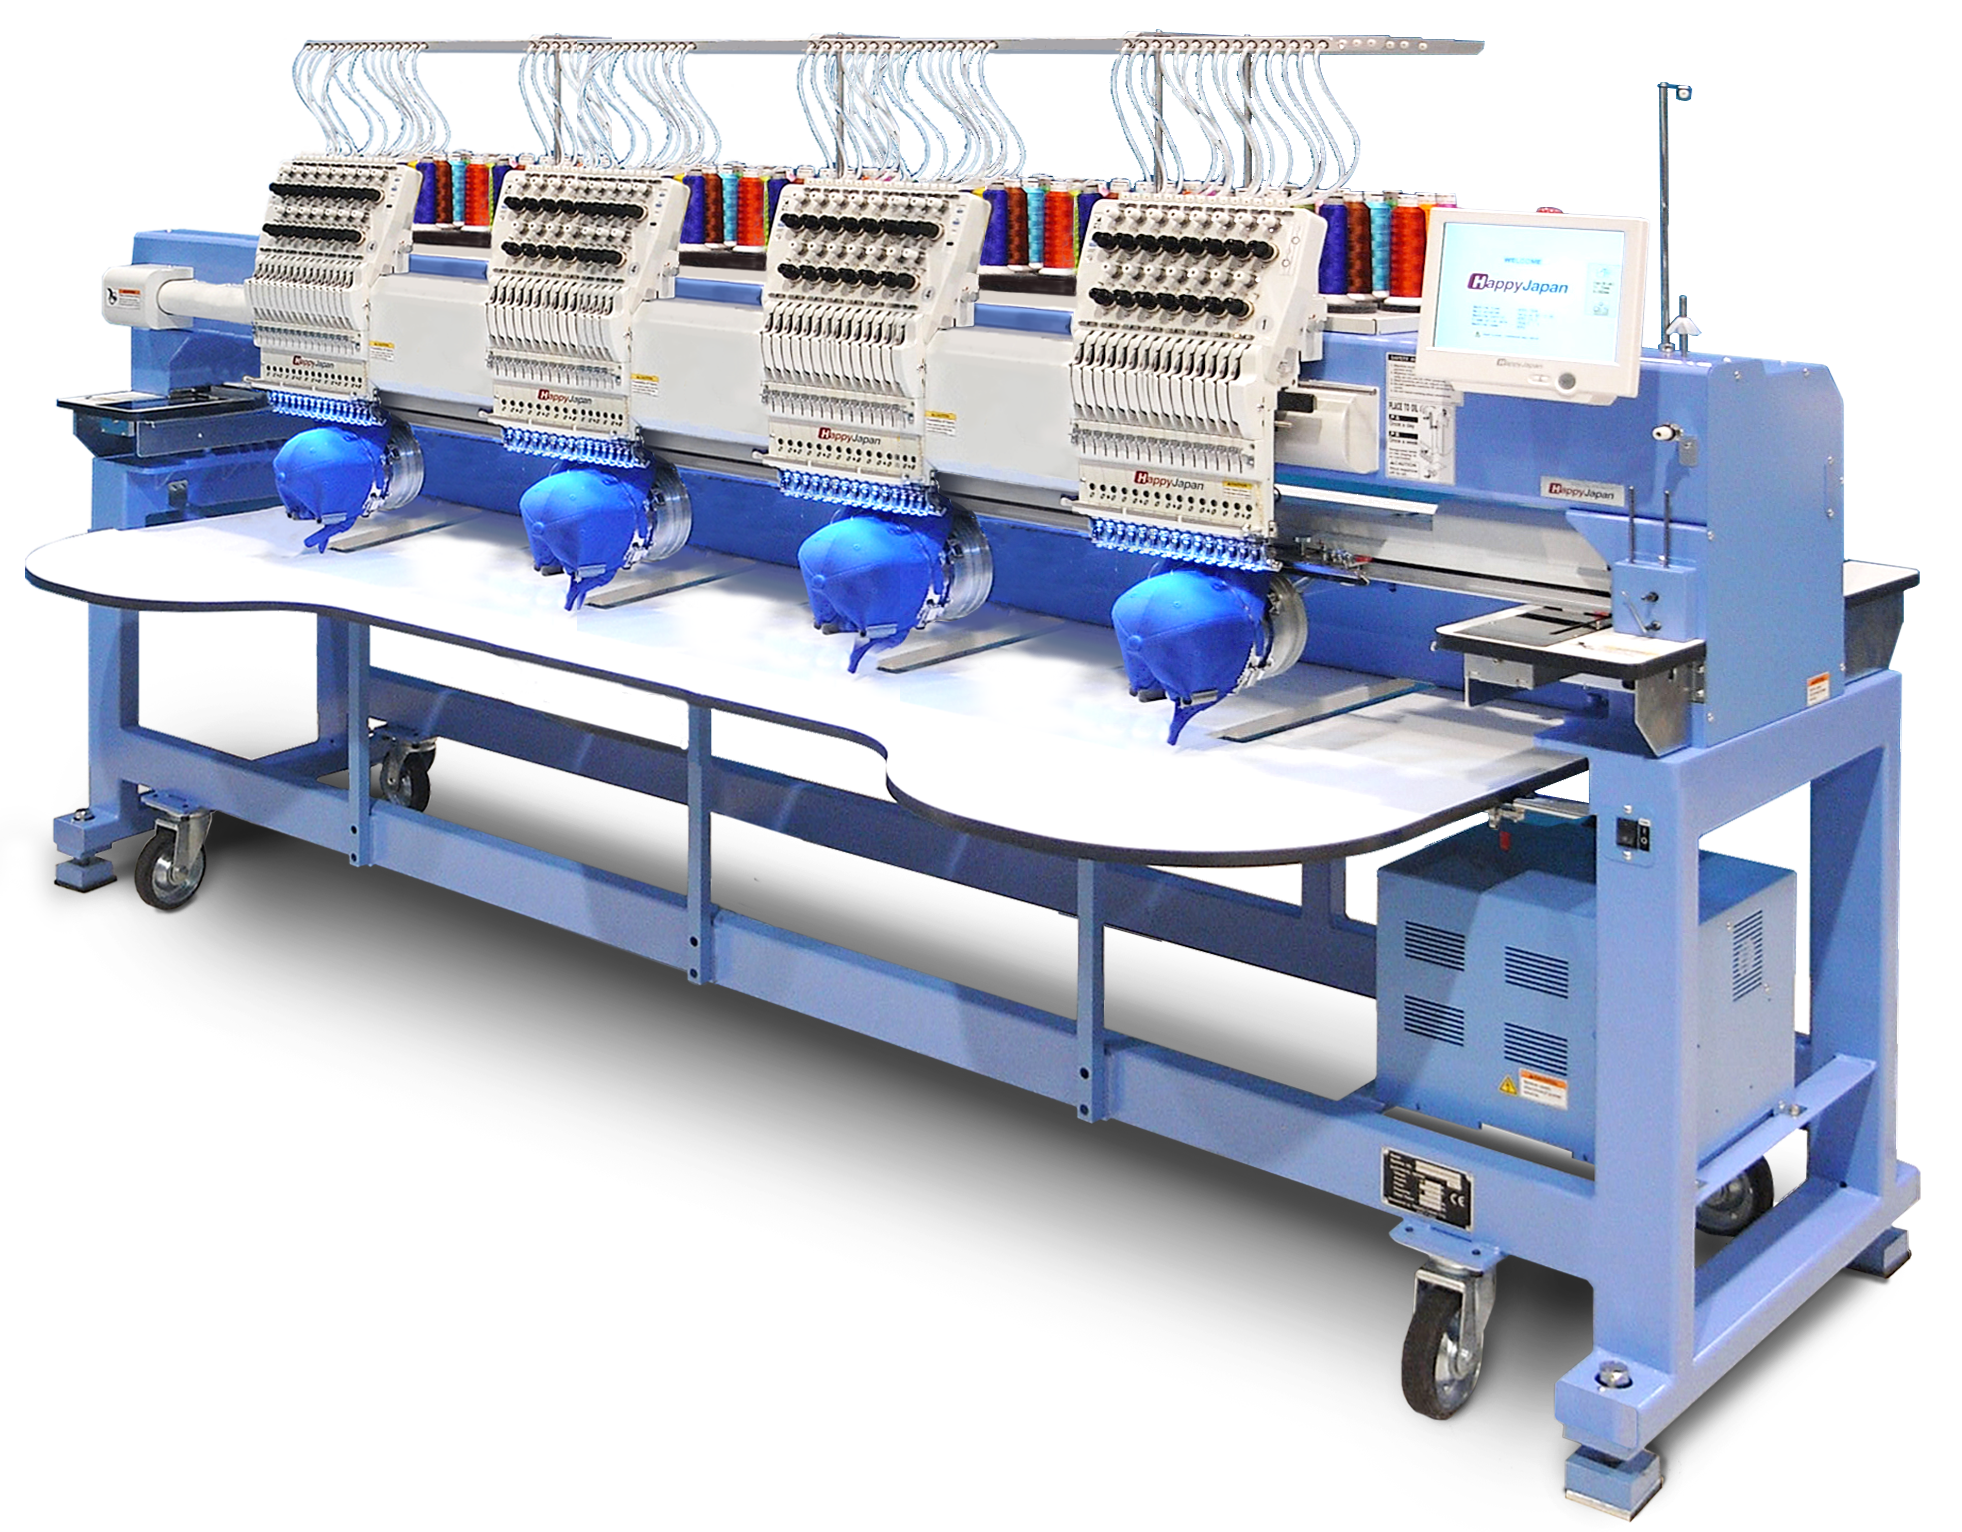 HappyJapan stretched-field 4-head embroidery machine